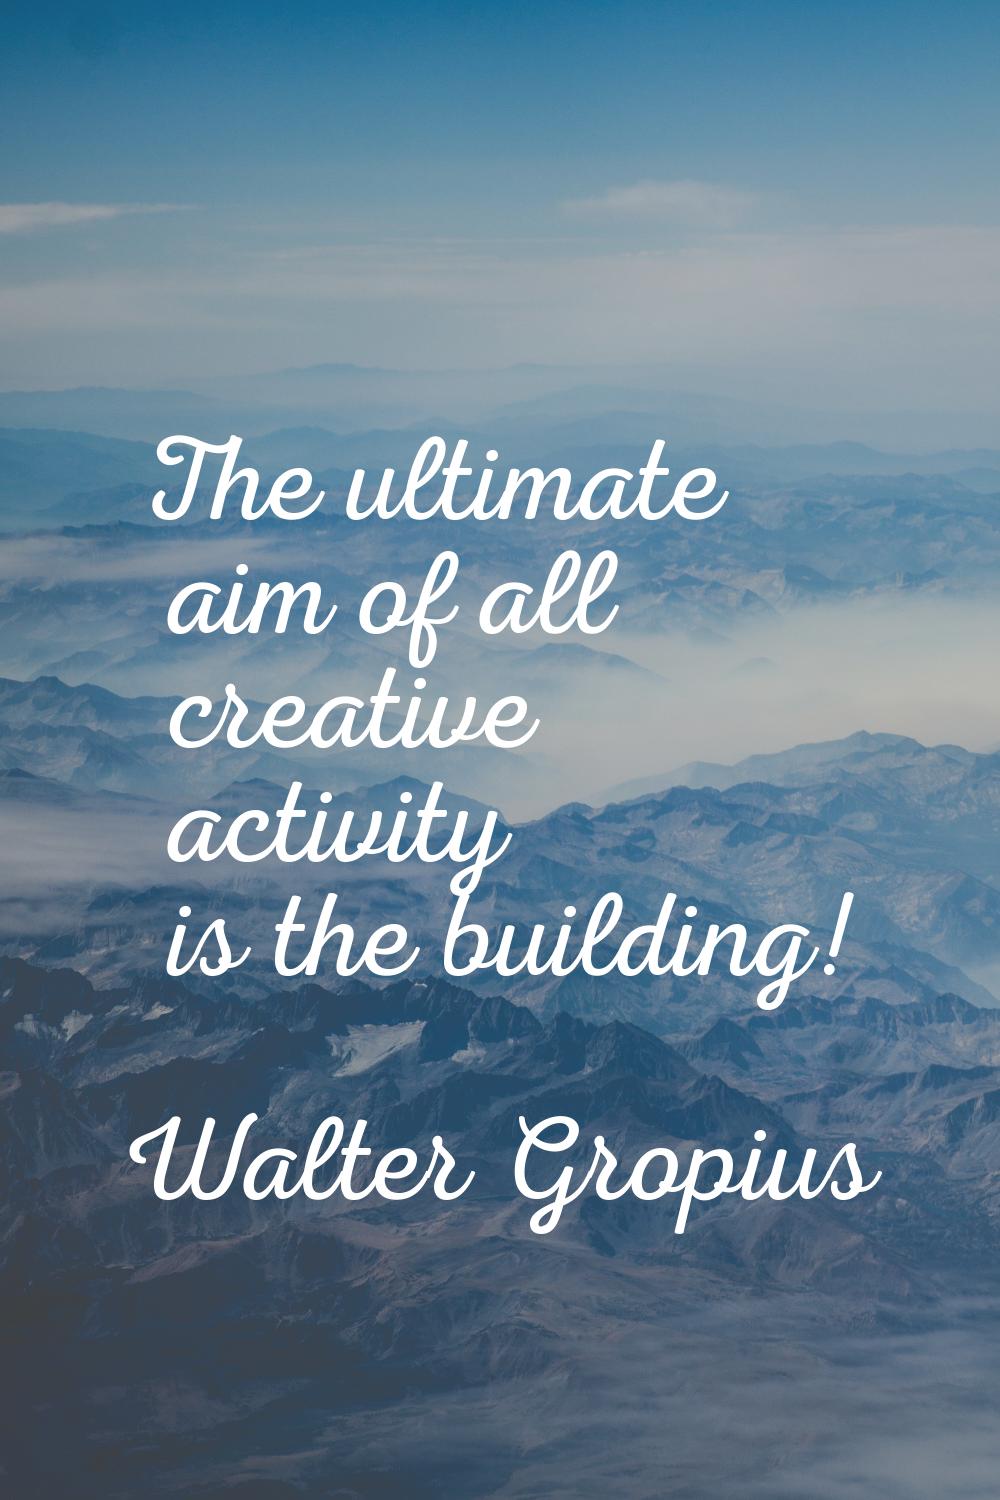 The ultimate aim of all creative activity is the building!